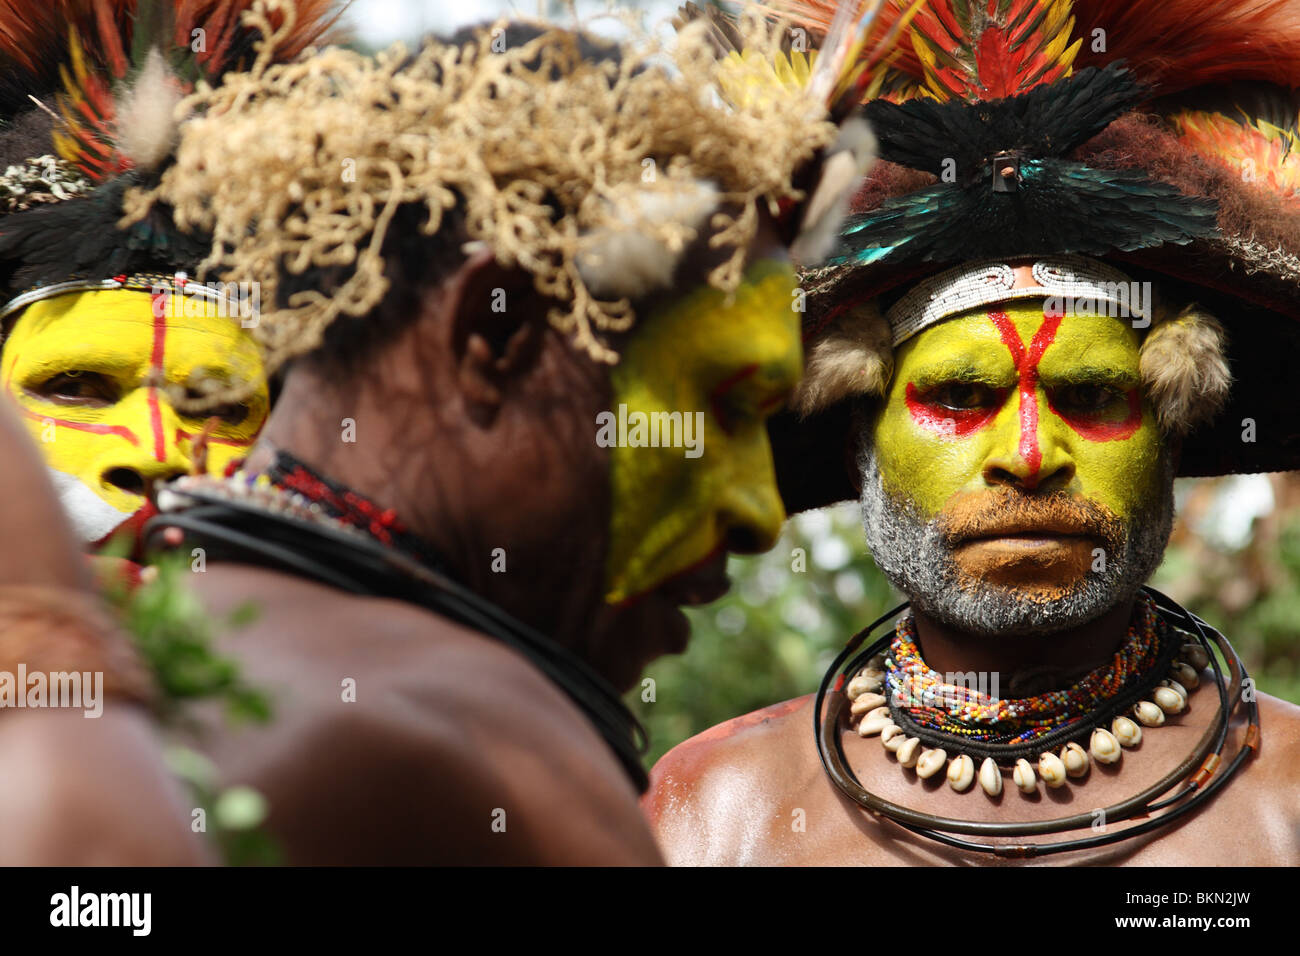 Members of the Huli tribe, photographed near Tari in the Highlands of Papua New Guinea Stock Photo